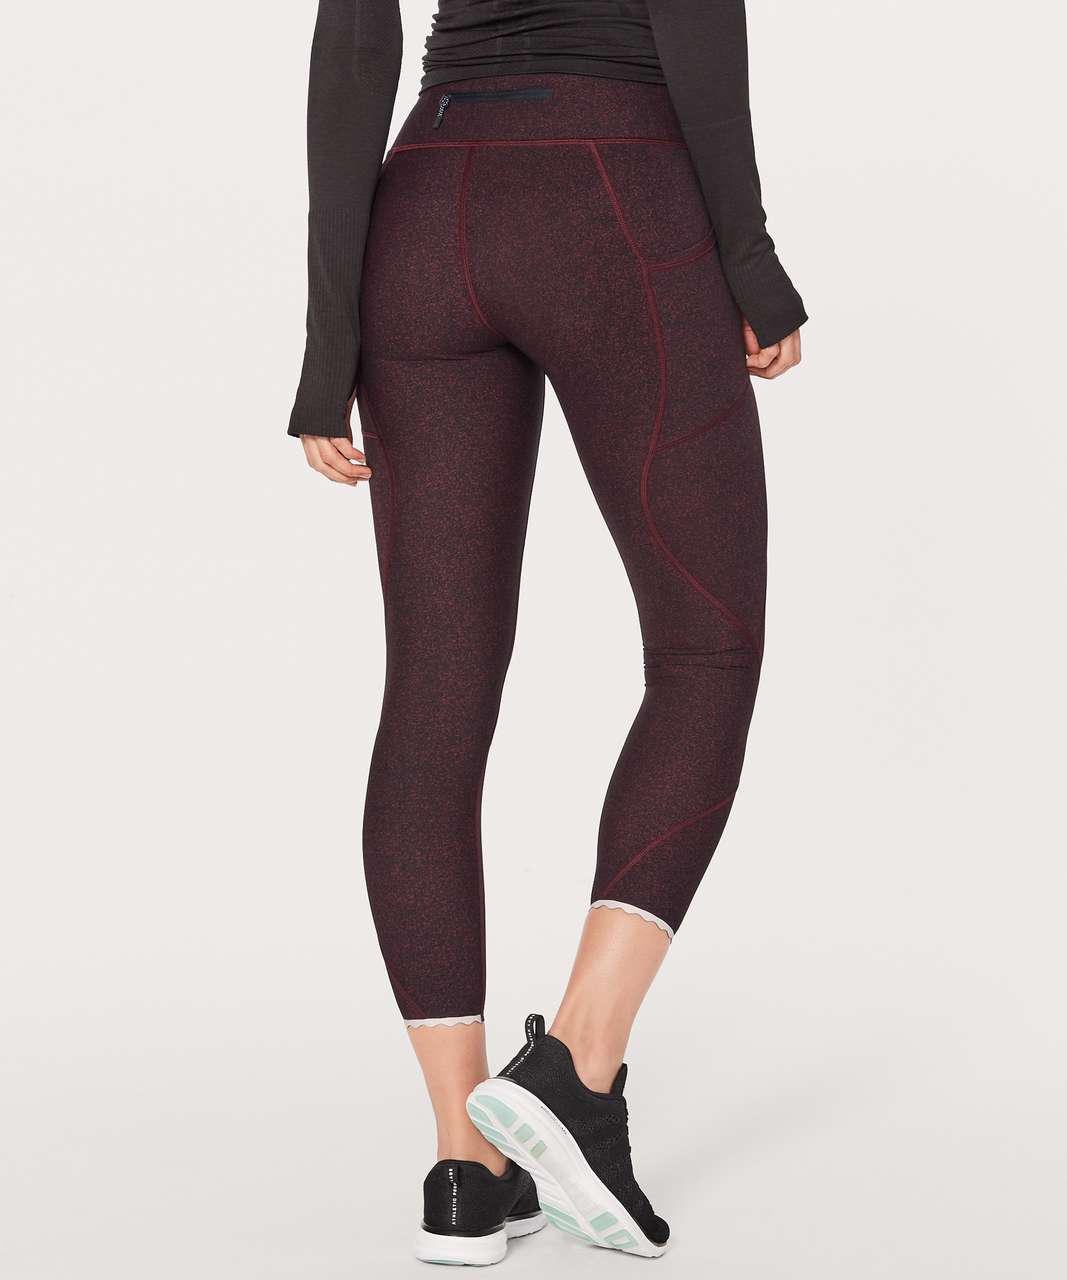 Lululemon Tight Stuff Scalloped & Reflective Tight // 6 // Cranberry NWT  Rare - Athletic apparel